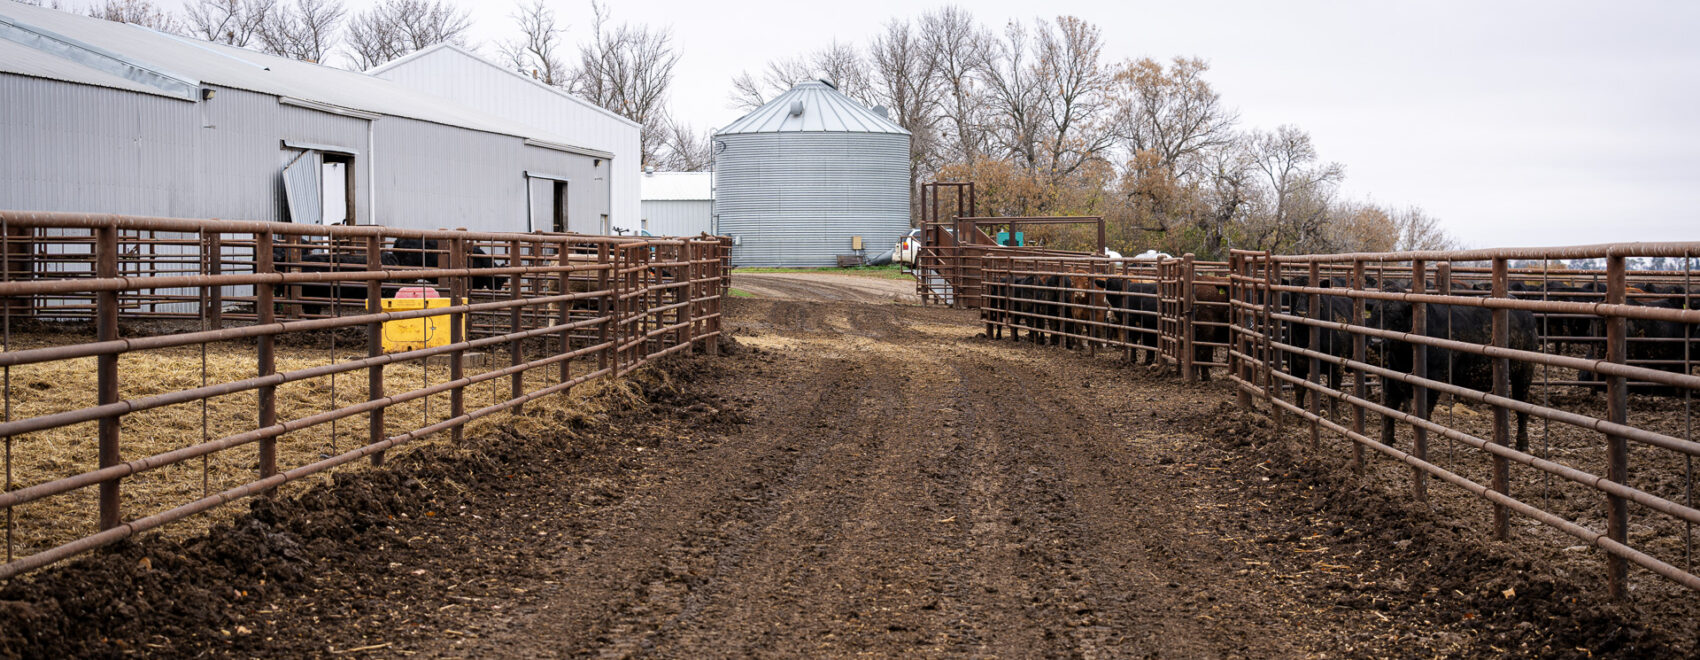 Photo of a cattle feed lot farm